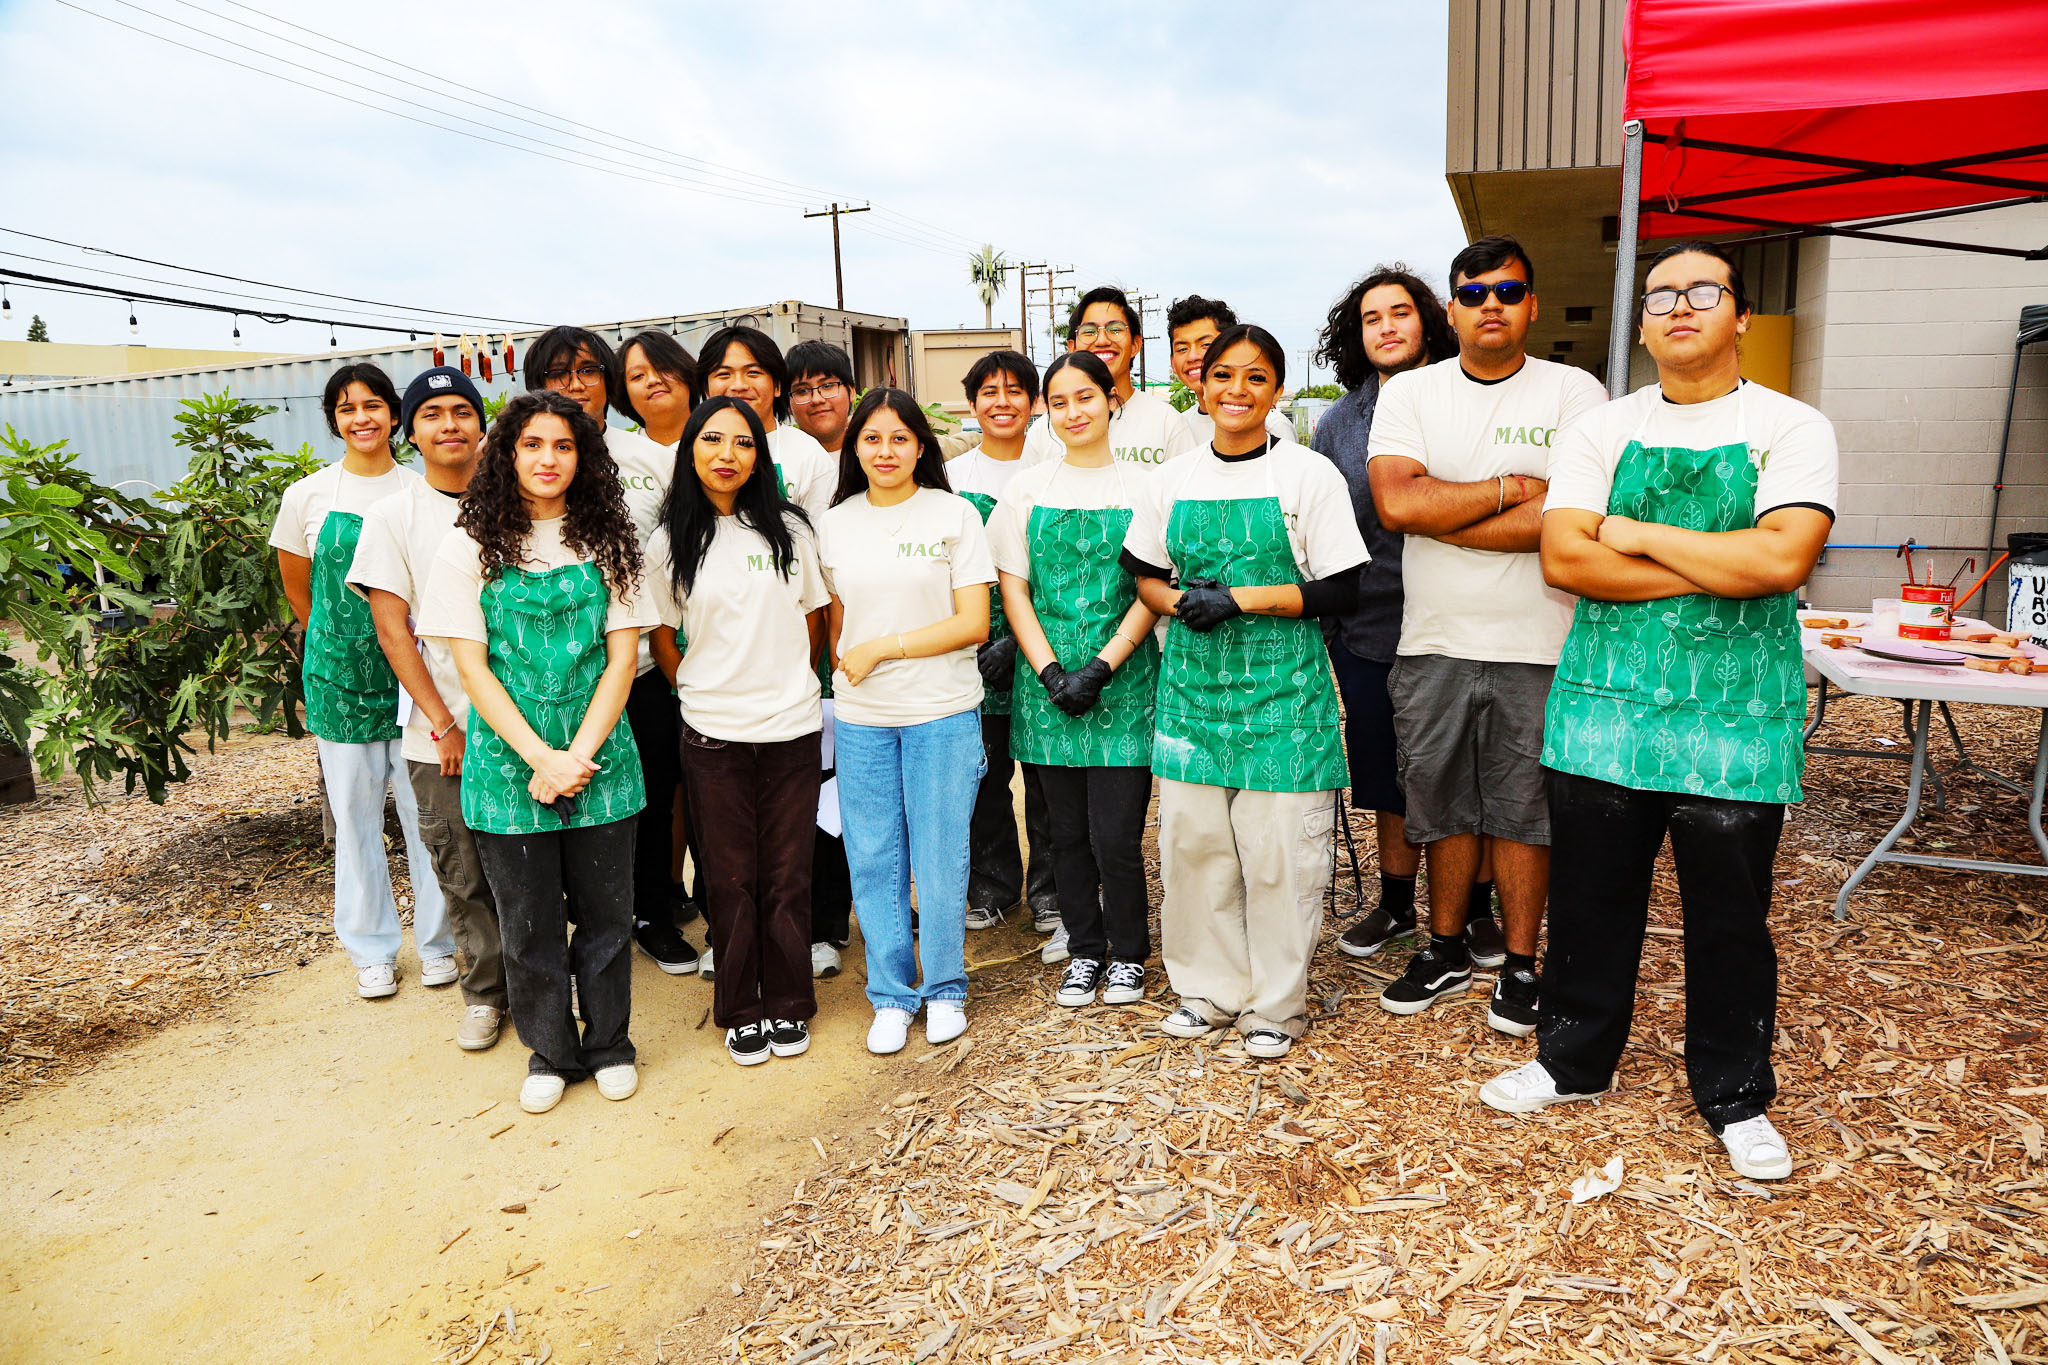 tudents at Magnolia High’s Agriscience Community Center after preparing a community dinner